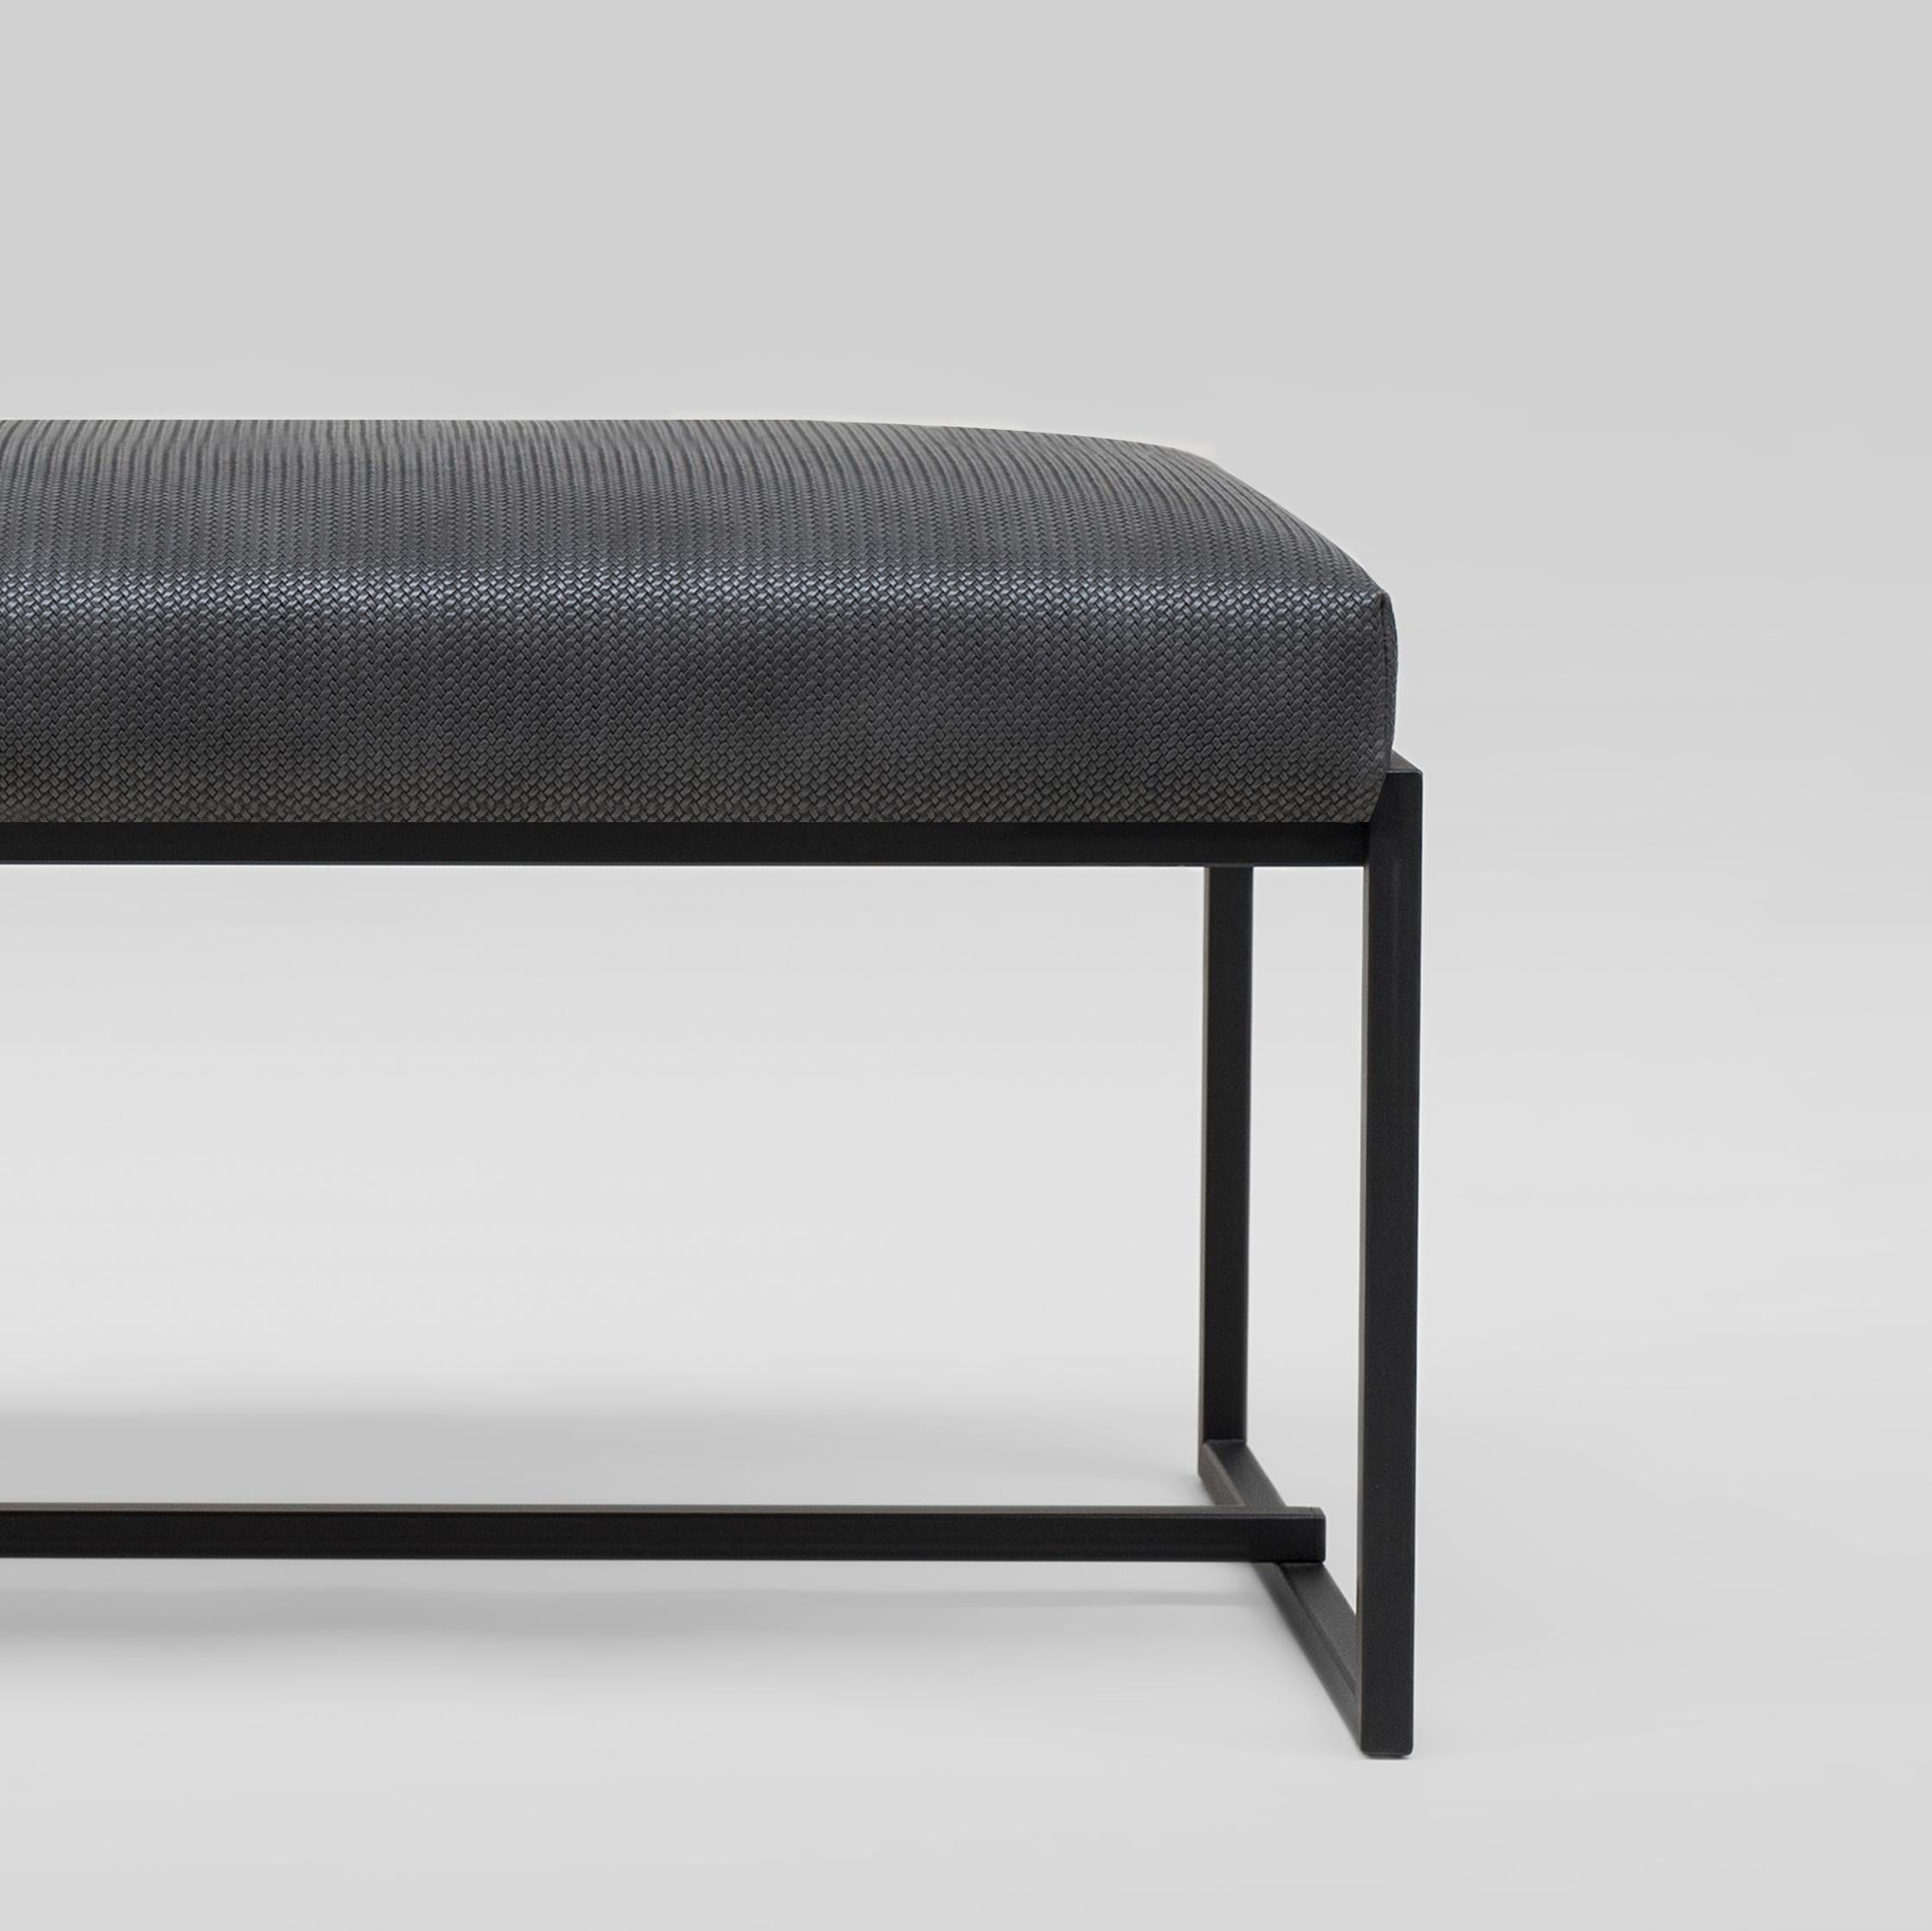 Modern Peter Ghyczy Bench Urban Grace 'GB03' Charcoal / Texturized Dark Fabric